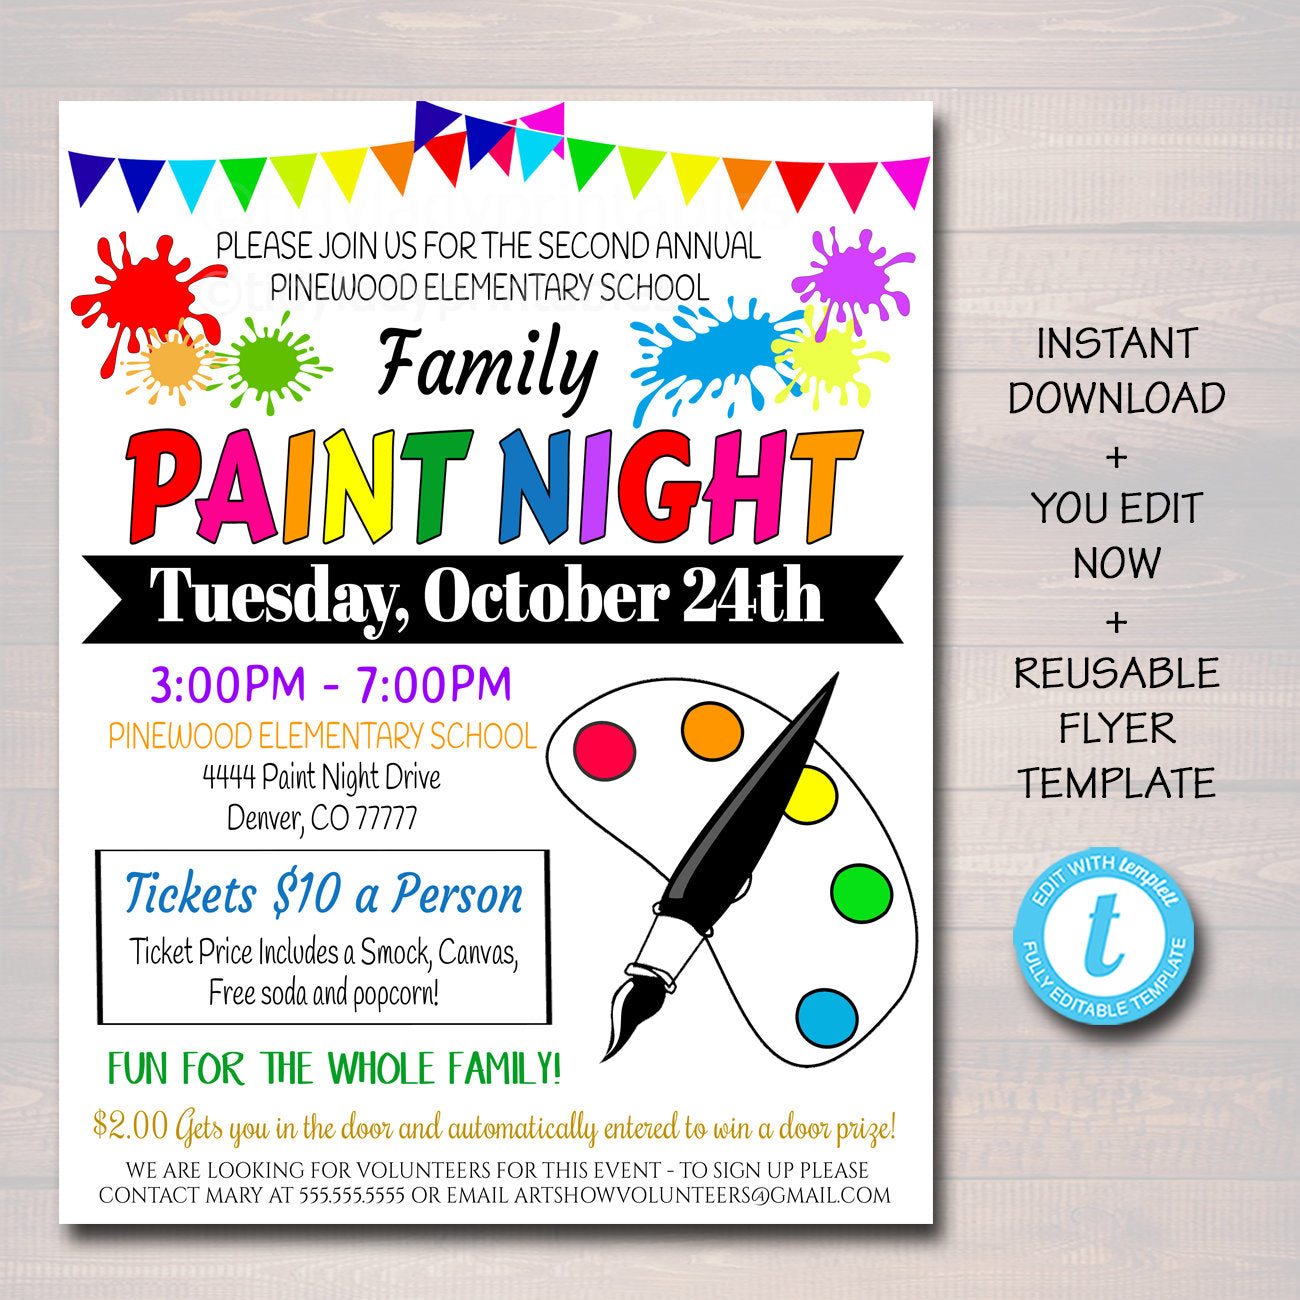 7 Paint Party Ideas: From Paint and Sip to Fundraising Events